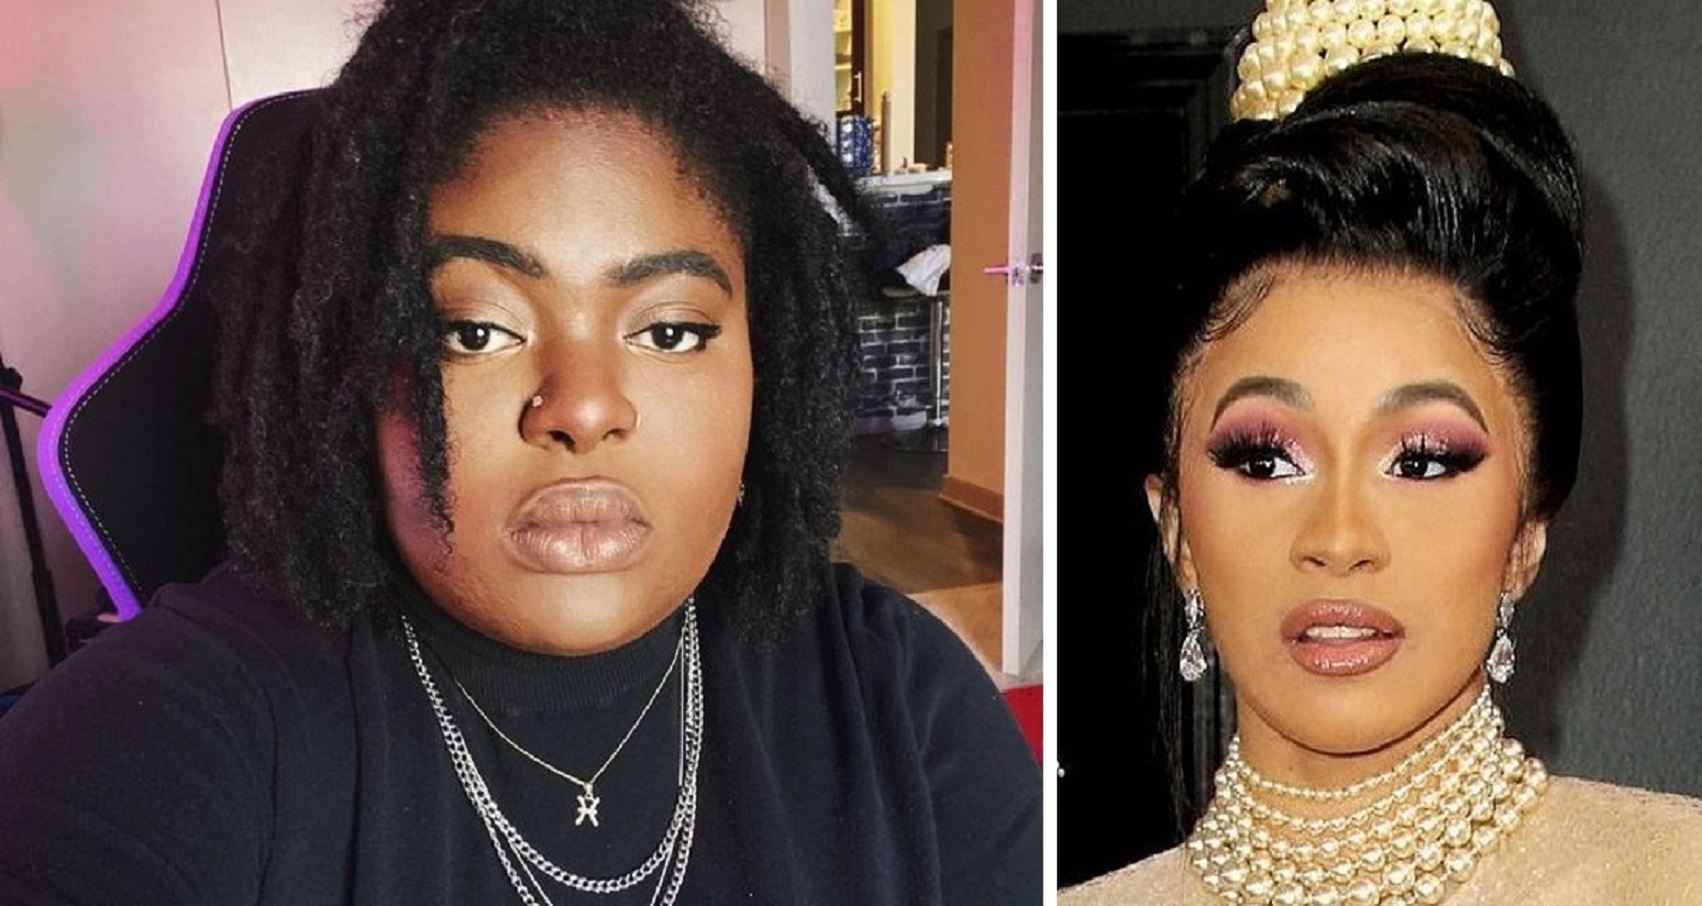 Chika Announces She’s No Longer Retiring After Contemplating Suicide, Thanks Cardi B For Support